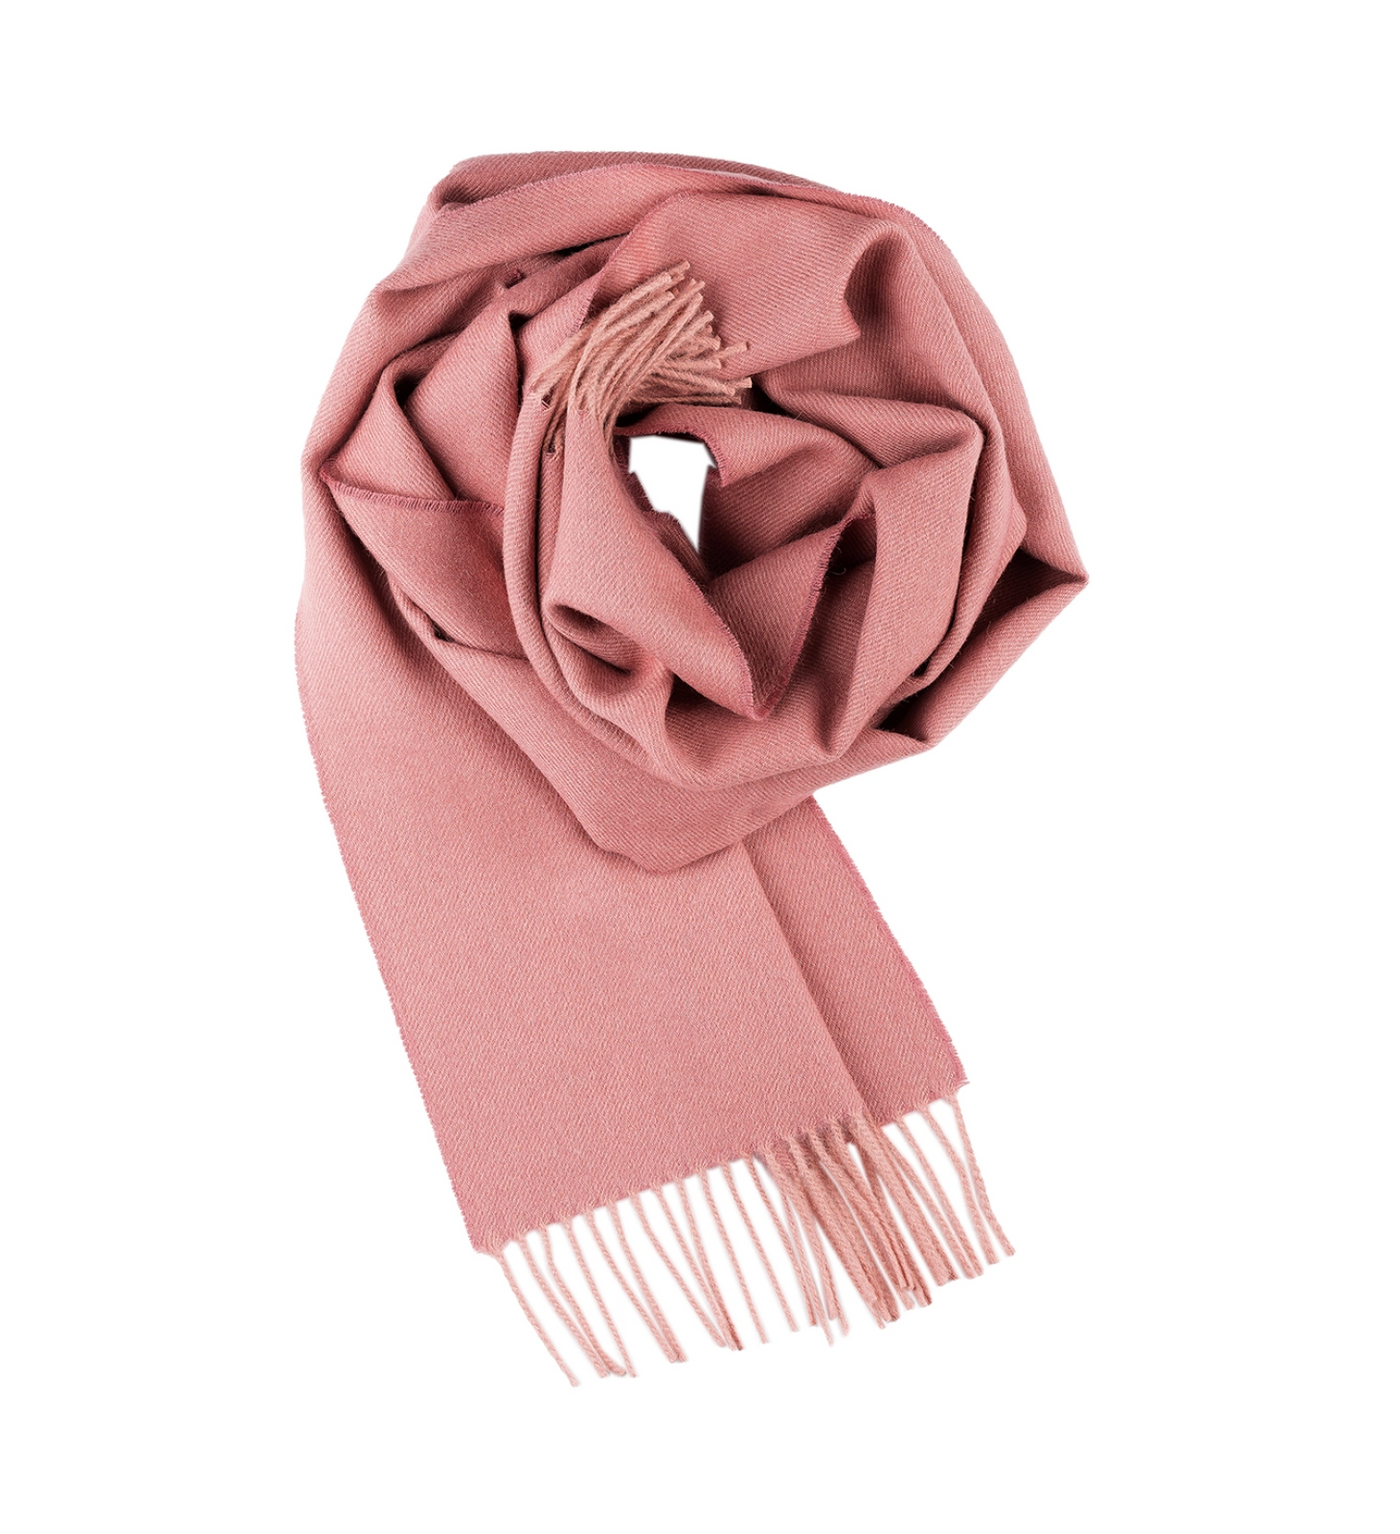 SCARF BABY ALPACA (Available in 6 Colors)